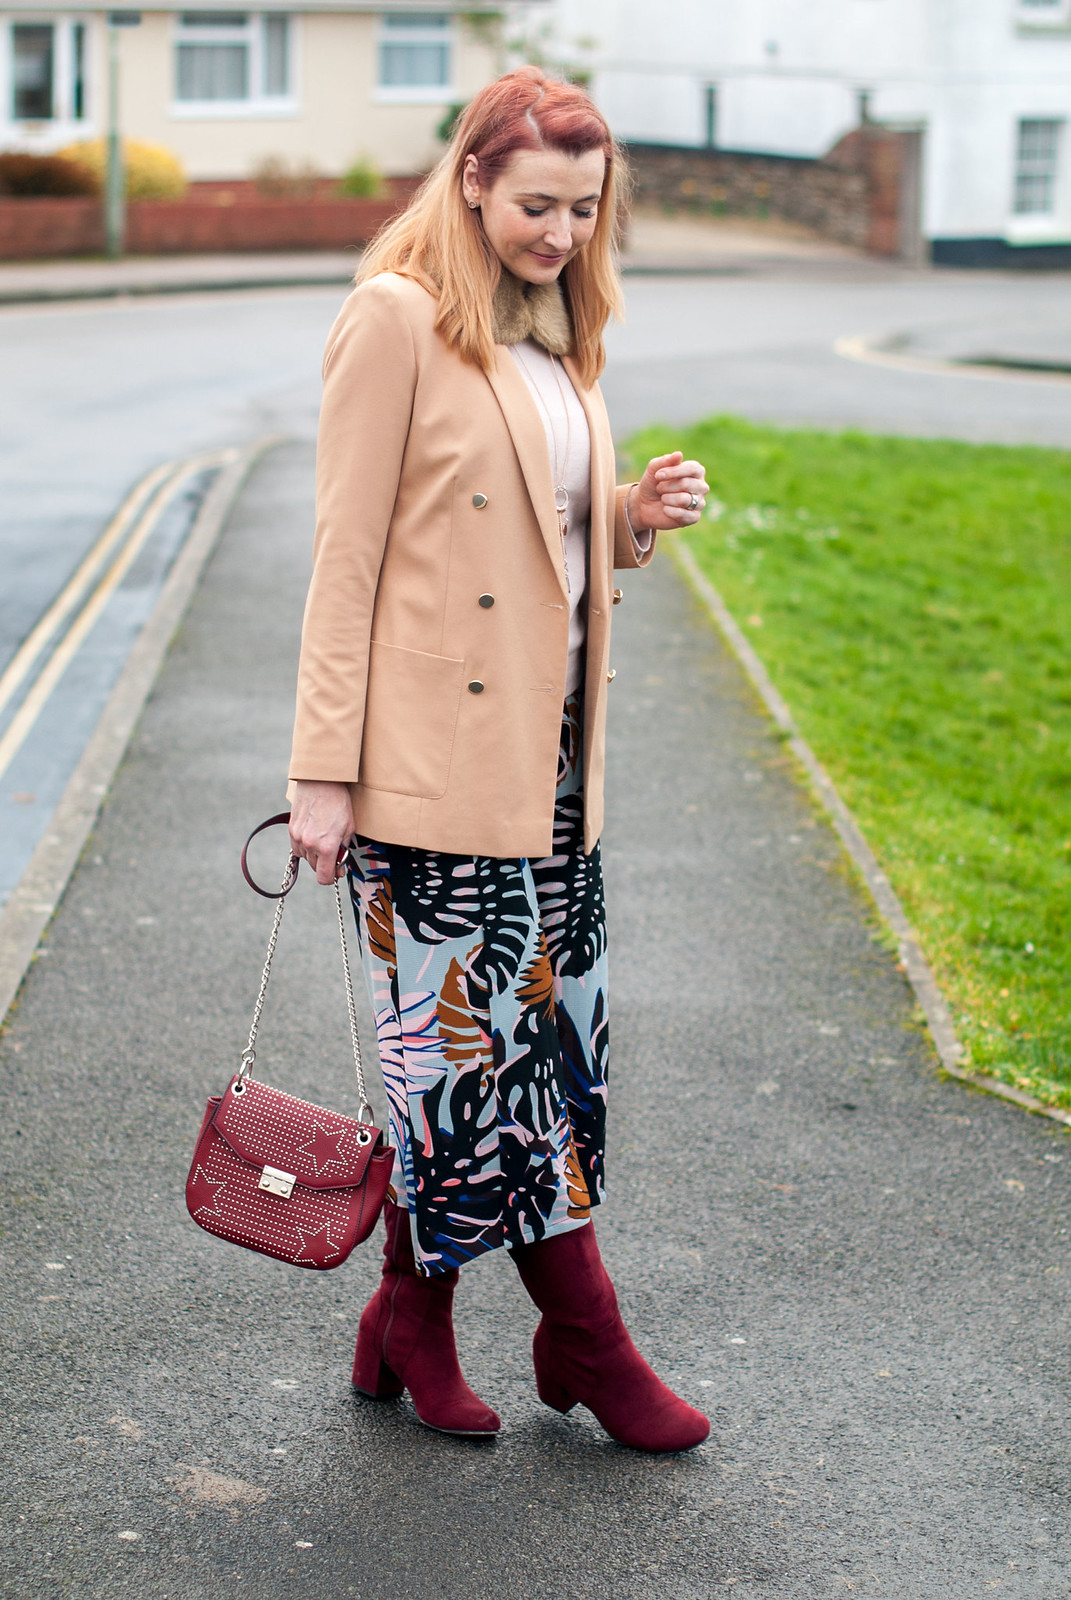 Styling Summer Pants in Winter: camel blazer, floral wide leg culottes, pink cashmere sweater, burgundy red suede boots | Not Dressed As Lamb, over 40 style